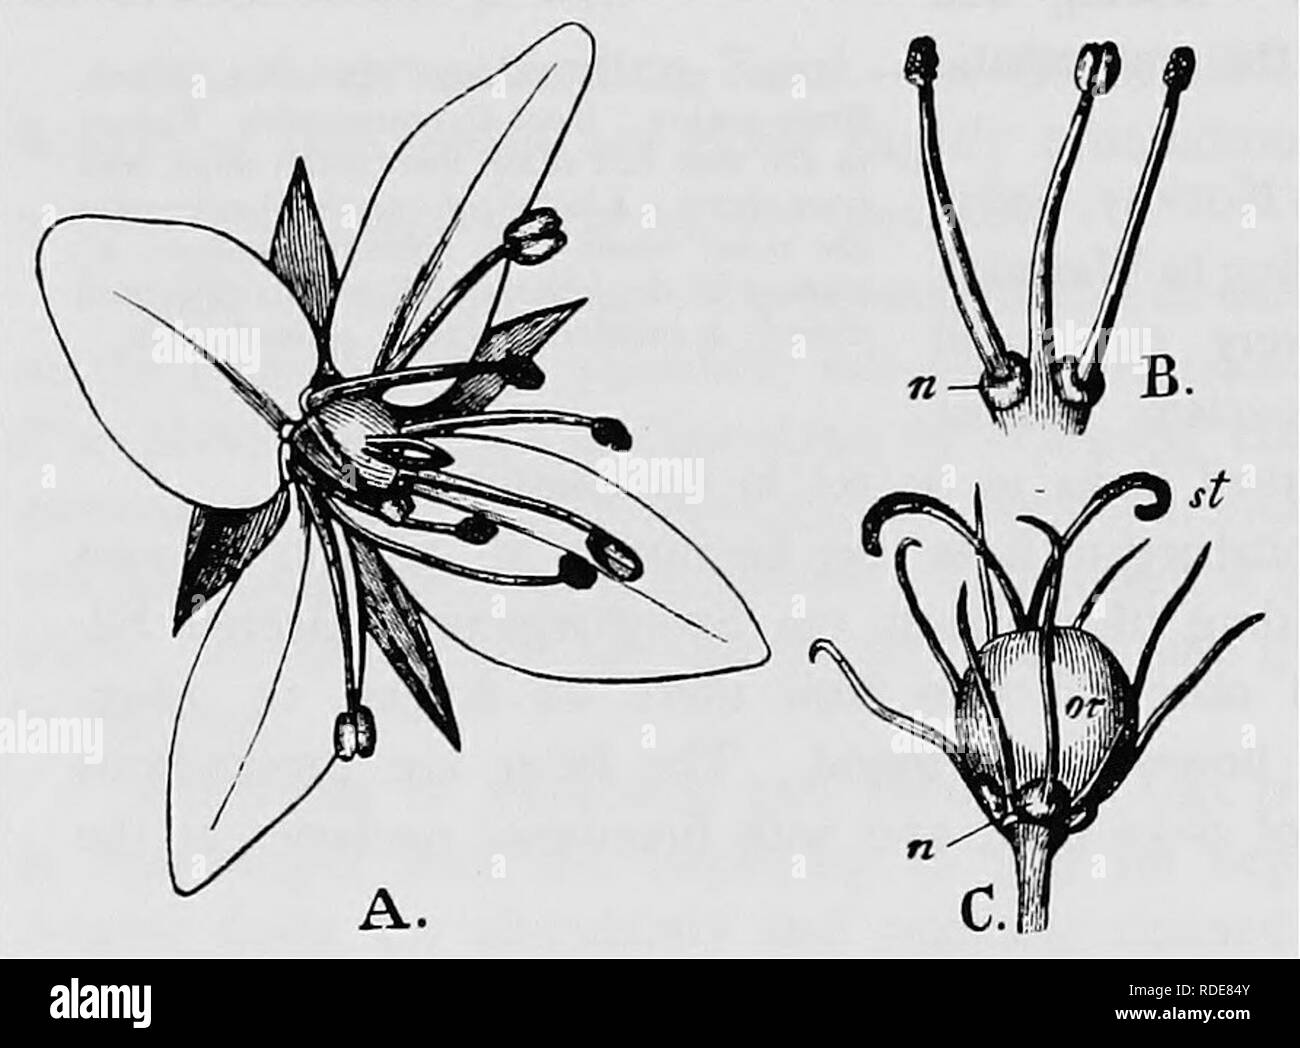 . Handbook of flower pollination : based upon Hermann Mu?ller's work 'The fertilisation of flowers by insects' . Fertilization of plants. i84 ANGIOSPERMAE—DICOTYLEDONES xxxviii, 1896; Schulz, 'Beitrage,' II, pp. 46—7; Kirchner, 'Flora v. Stuttgart,' P- 235.)—Hermann Miiller describes the flowers as protogynous, with stigmas persisting for a long time, while A. Schulz found them to be almost always homogamous, though sometimes slightly protandrous or slightly protogynous. At the base of each of the five outer stamens there is a fleshy swelling, which secretes a relatively large drop of nectar.  Stock Photo